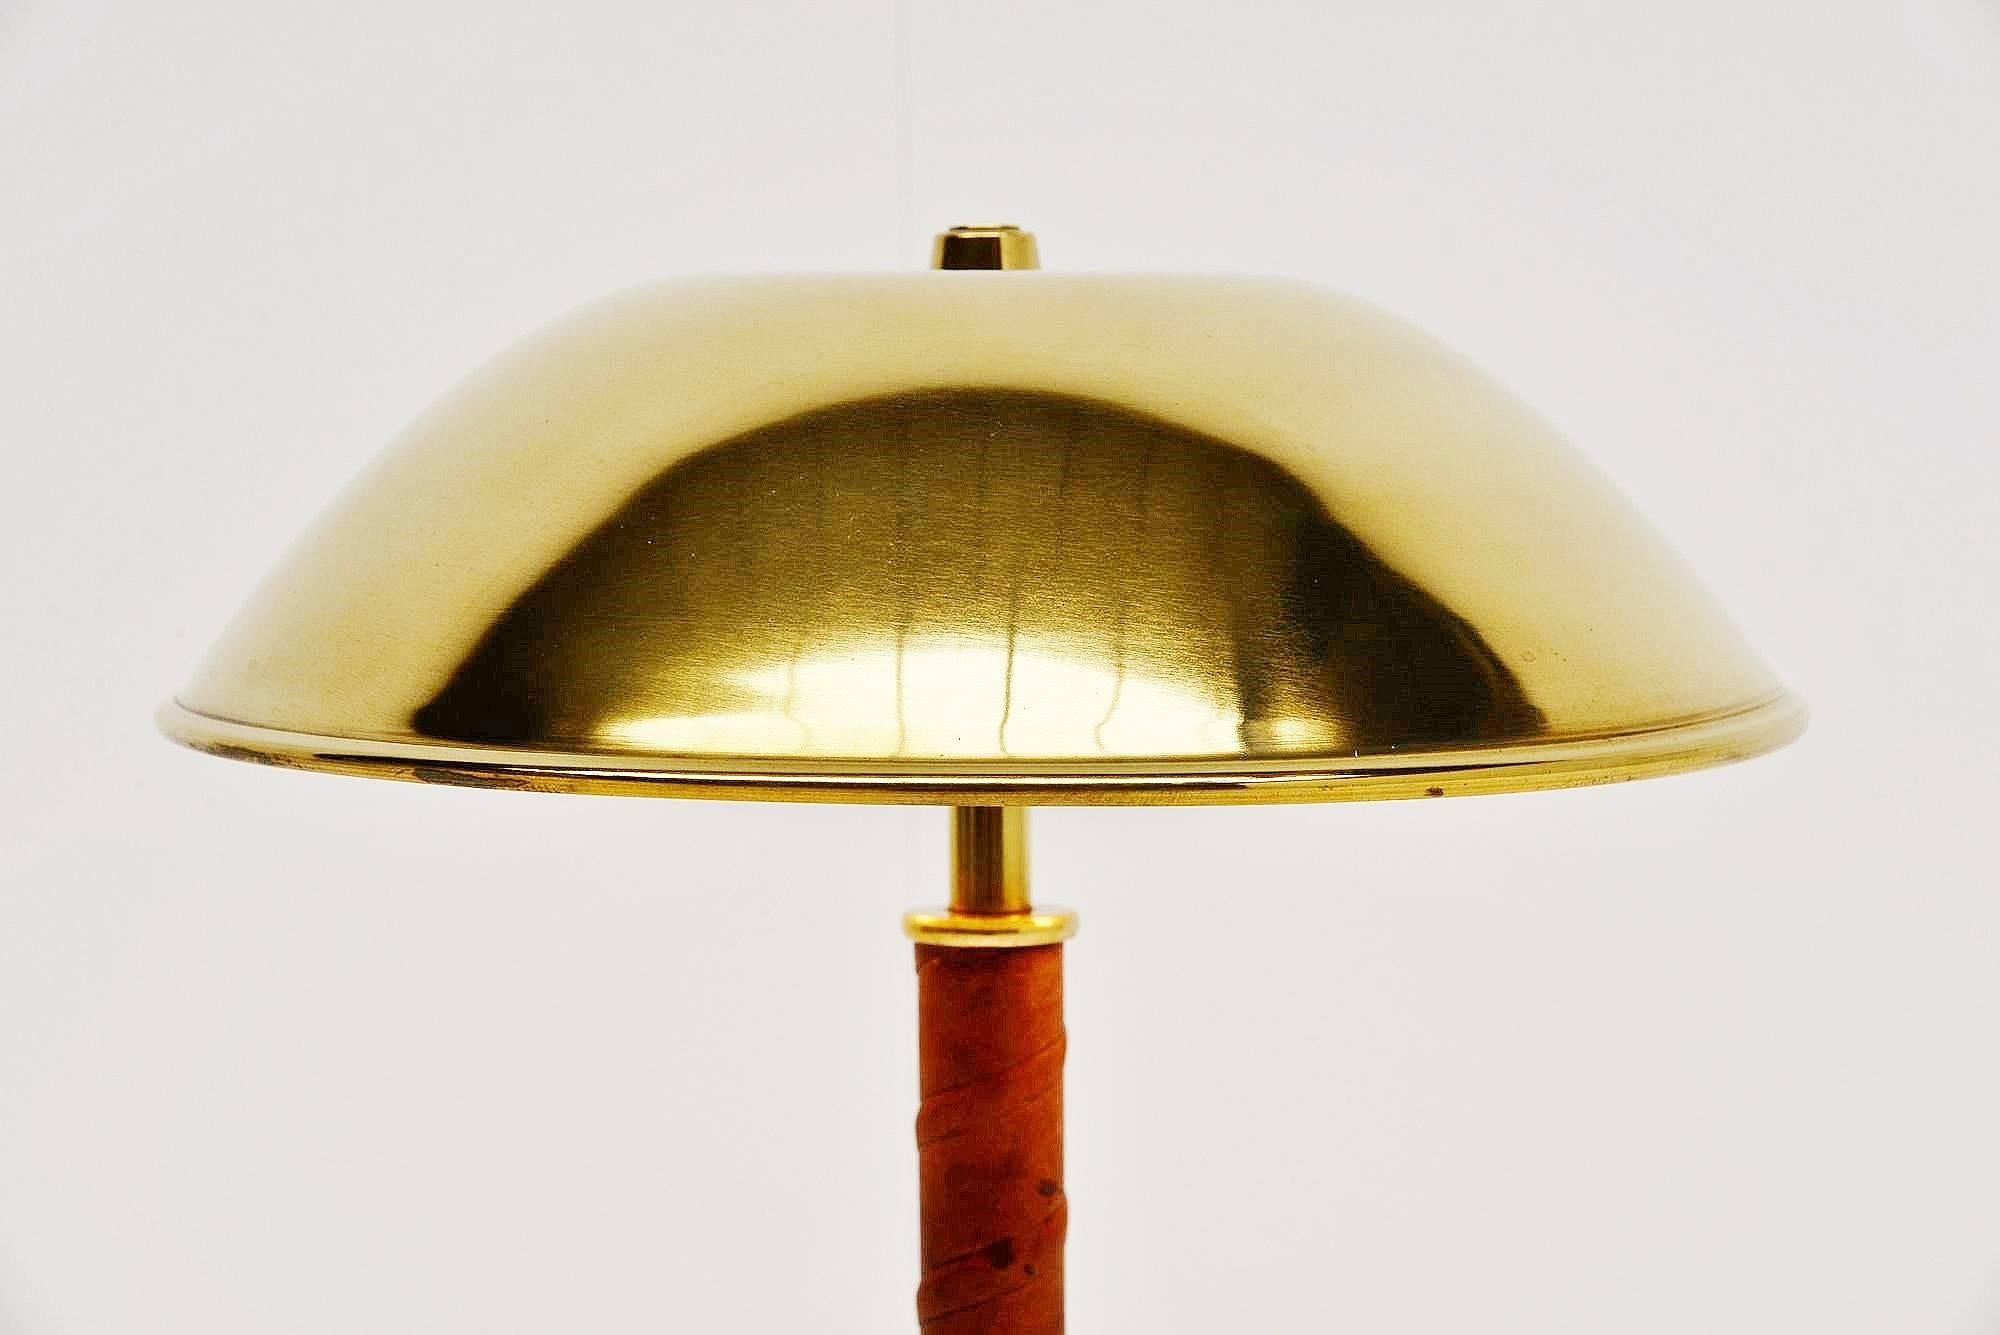 Highly decorative table lamp designed and made by ASEA Belysning, Sweden 1960. This table lamp is made of brass and has a very nice detailed leather ribbon around the bar. Give nice and warm light when lit and is in very nice clean shiny brass.